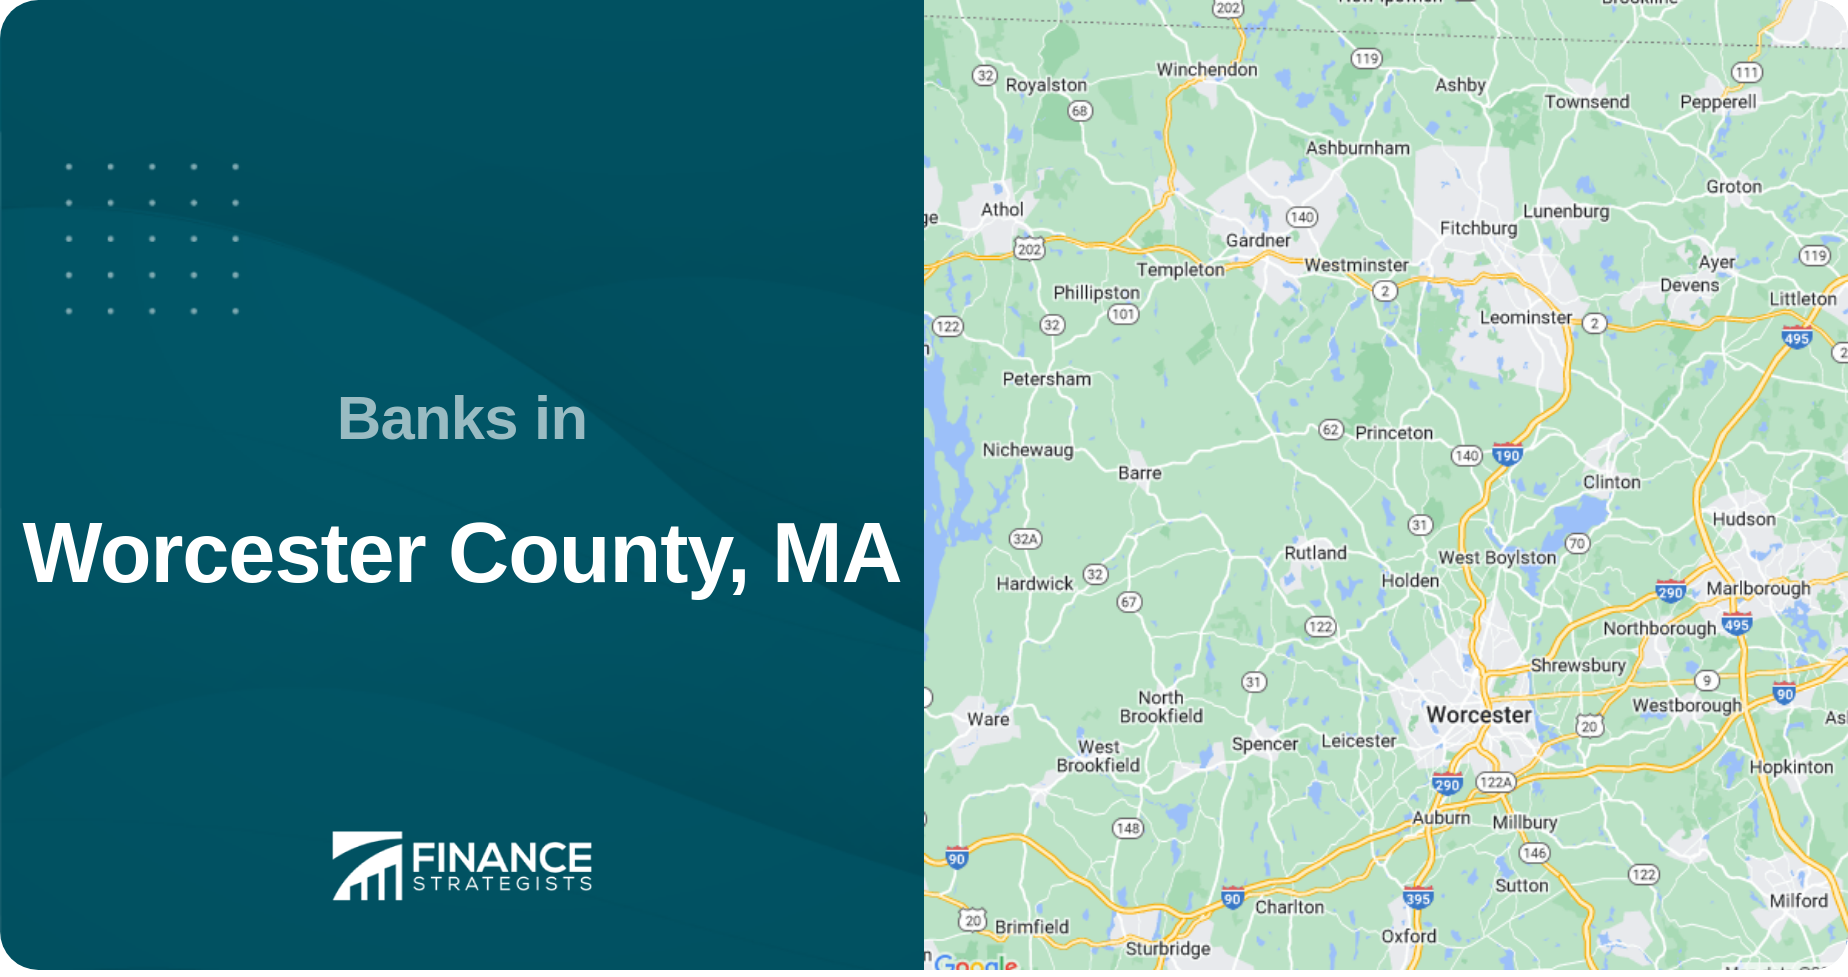 Banks in Worcester County, MA